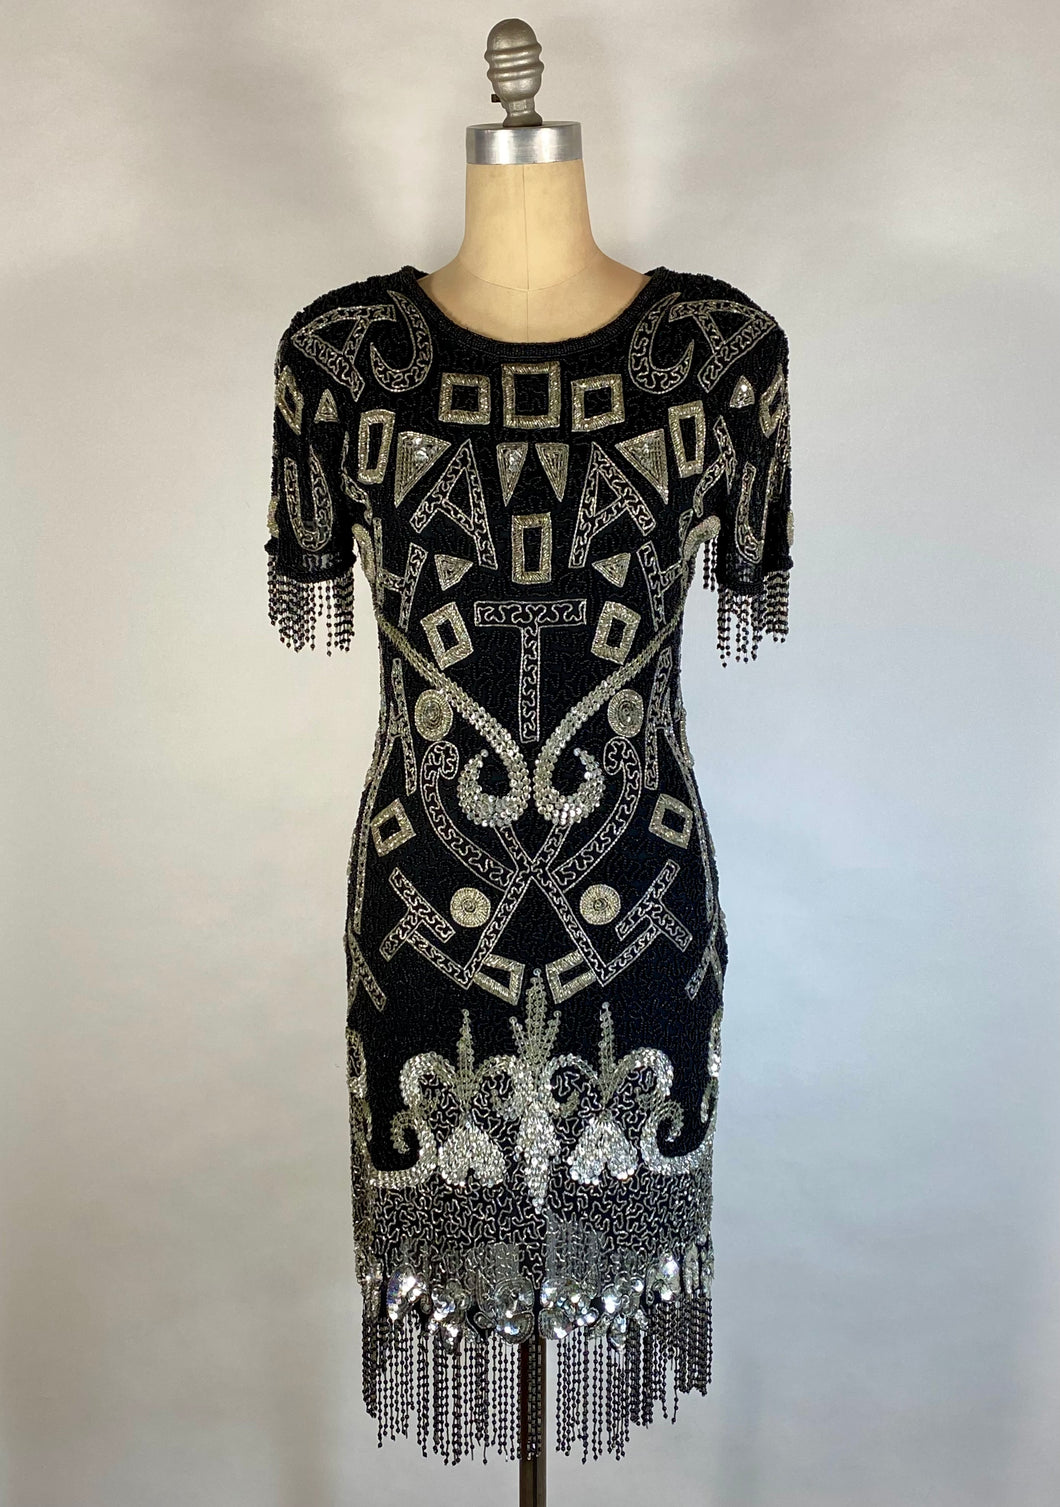 1980's-1990's FULLY BEADED & SEQUIN black & silver open-back dress size 2/4P